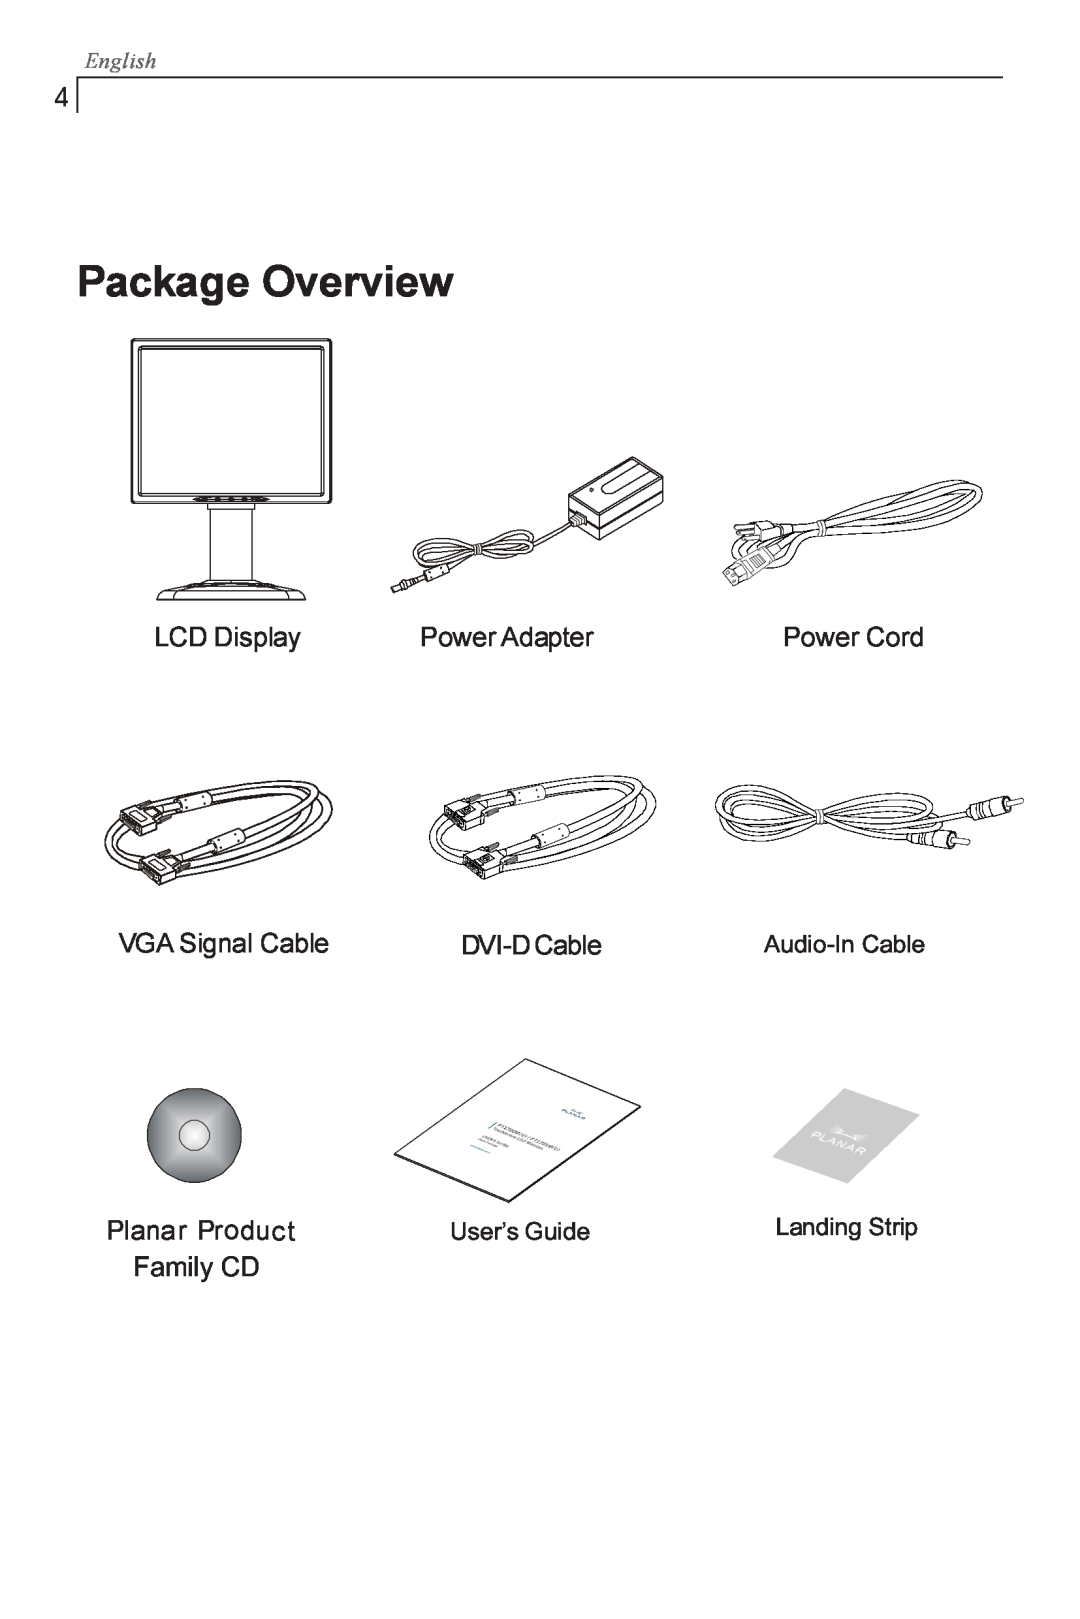 Planar PX1710M manual Package Overview, Family CD, User’s Guide, English, Audio-In Cable, Landing Strip 